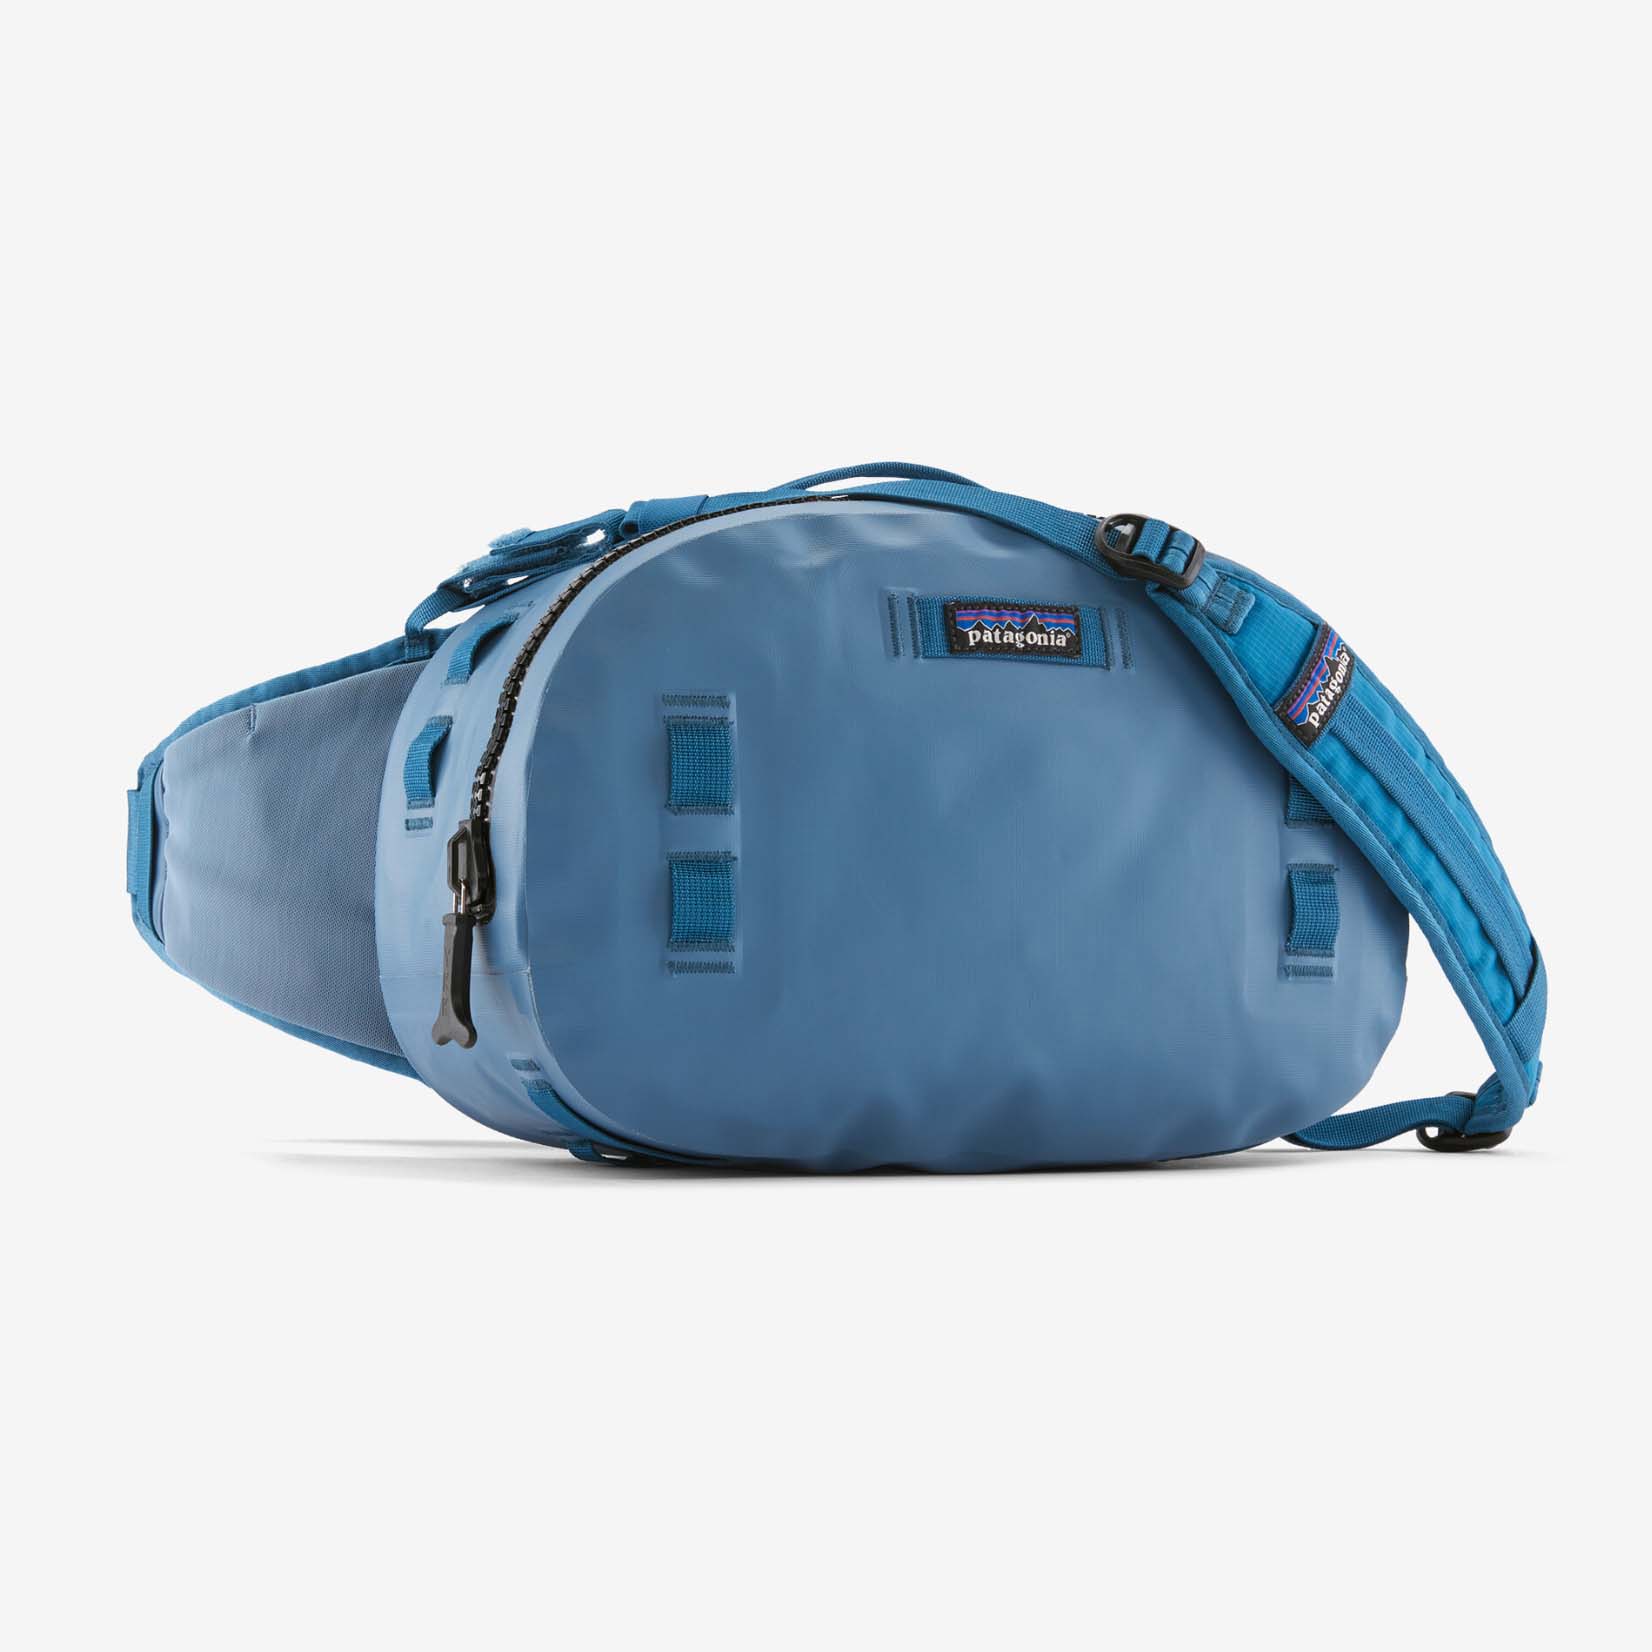 Patagonia heavy duty fanny pack in blue